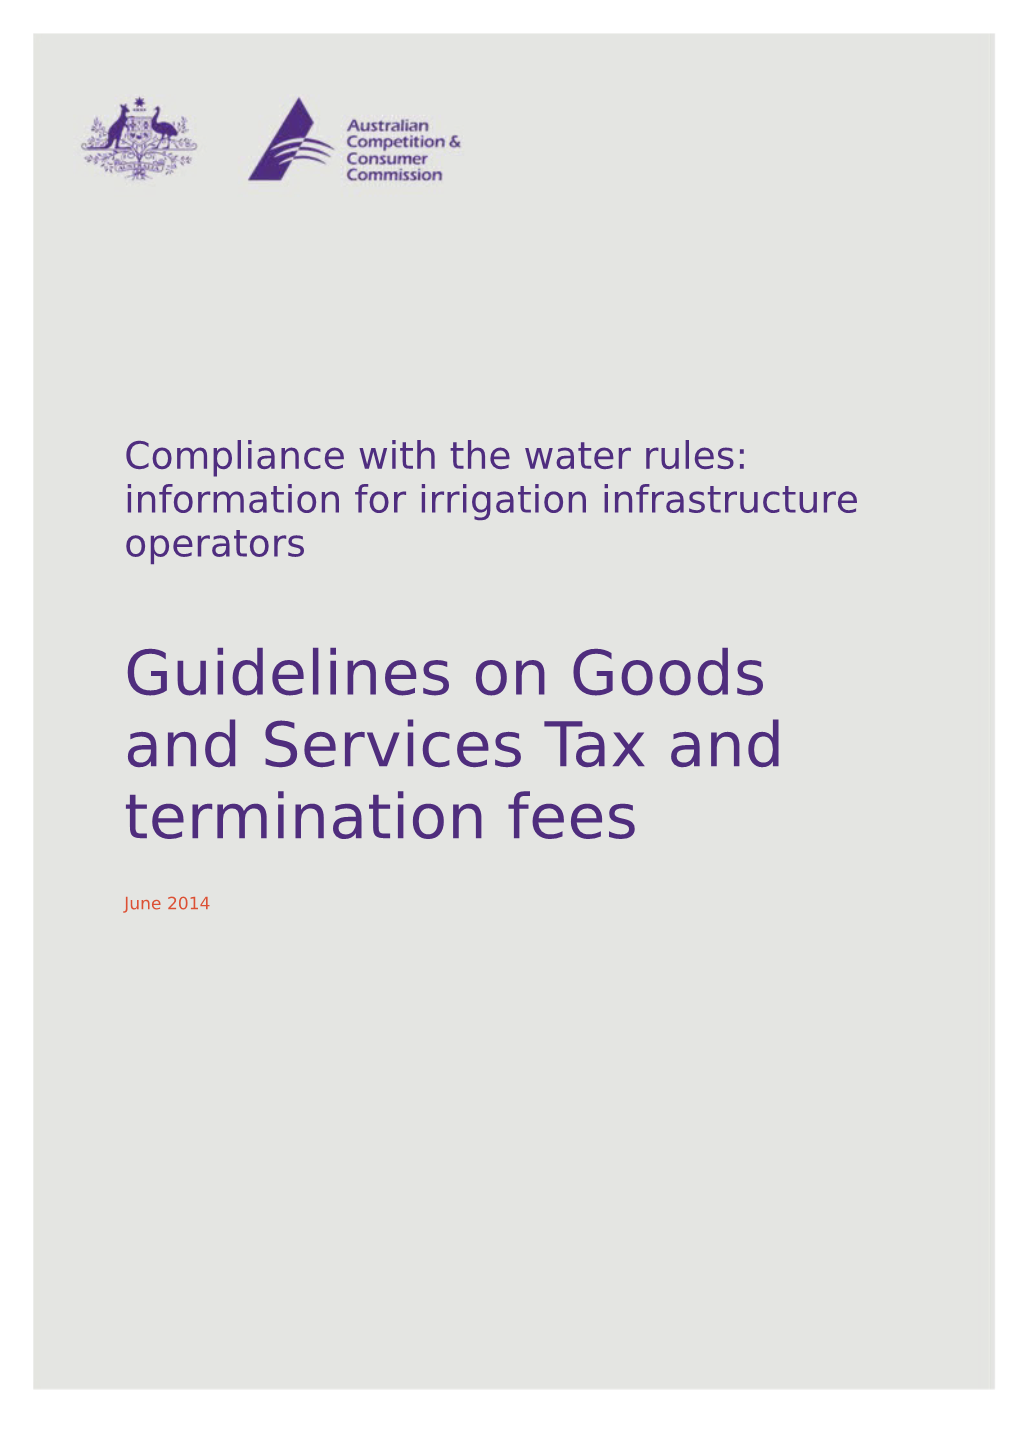 Guidelines on Goods and Services Tax and Termination Fees